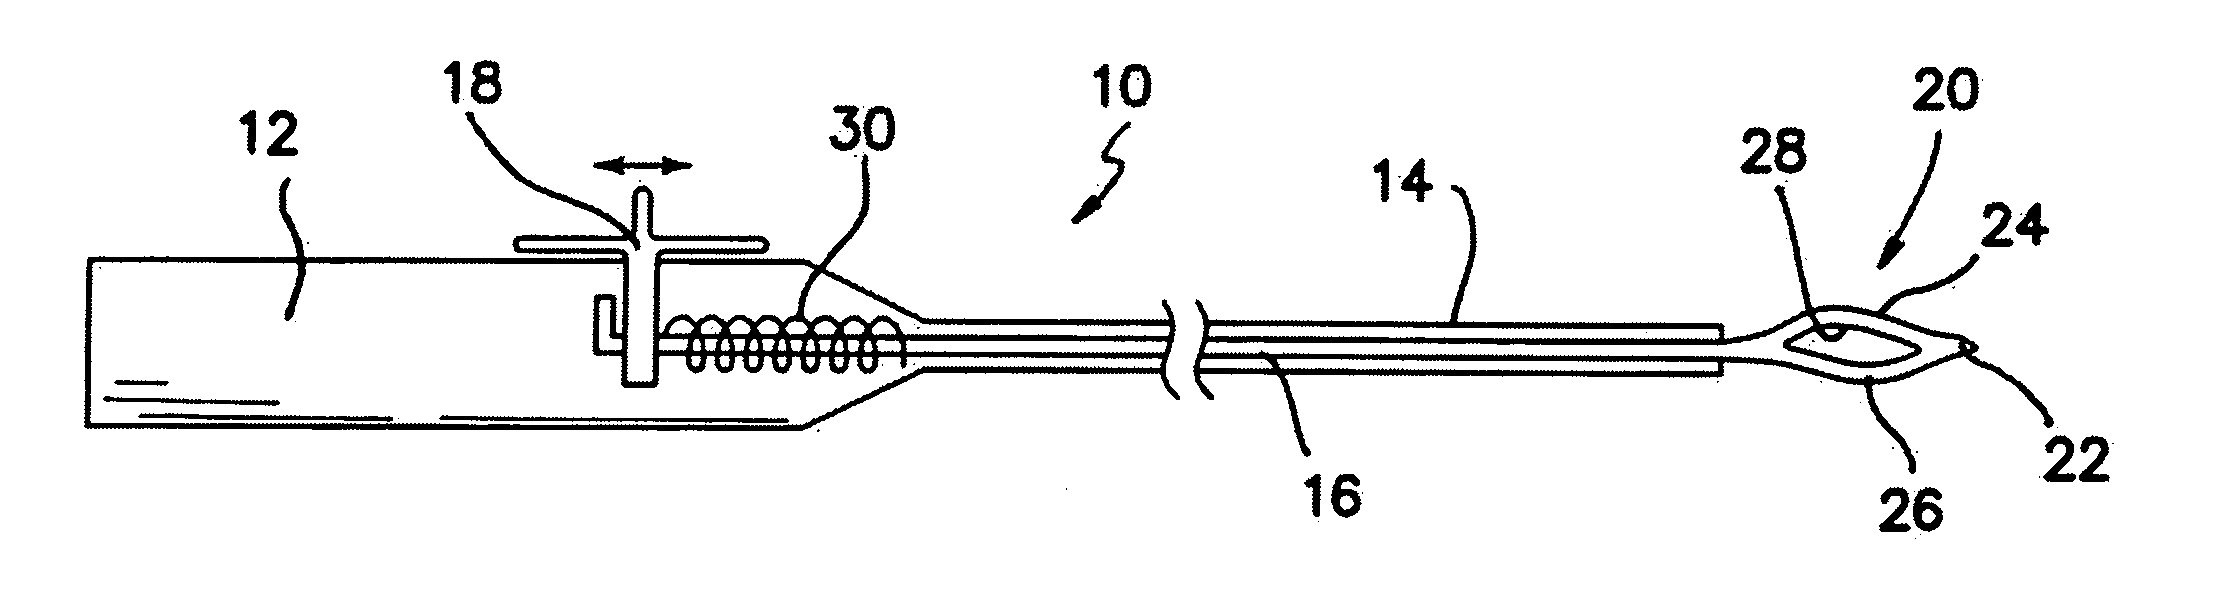 Expandable needle suture apparatus and associated handle assembly with rotational suture manipulation system